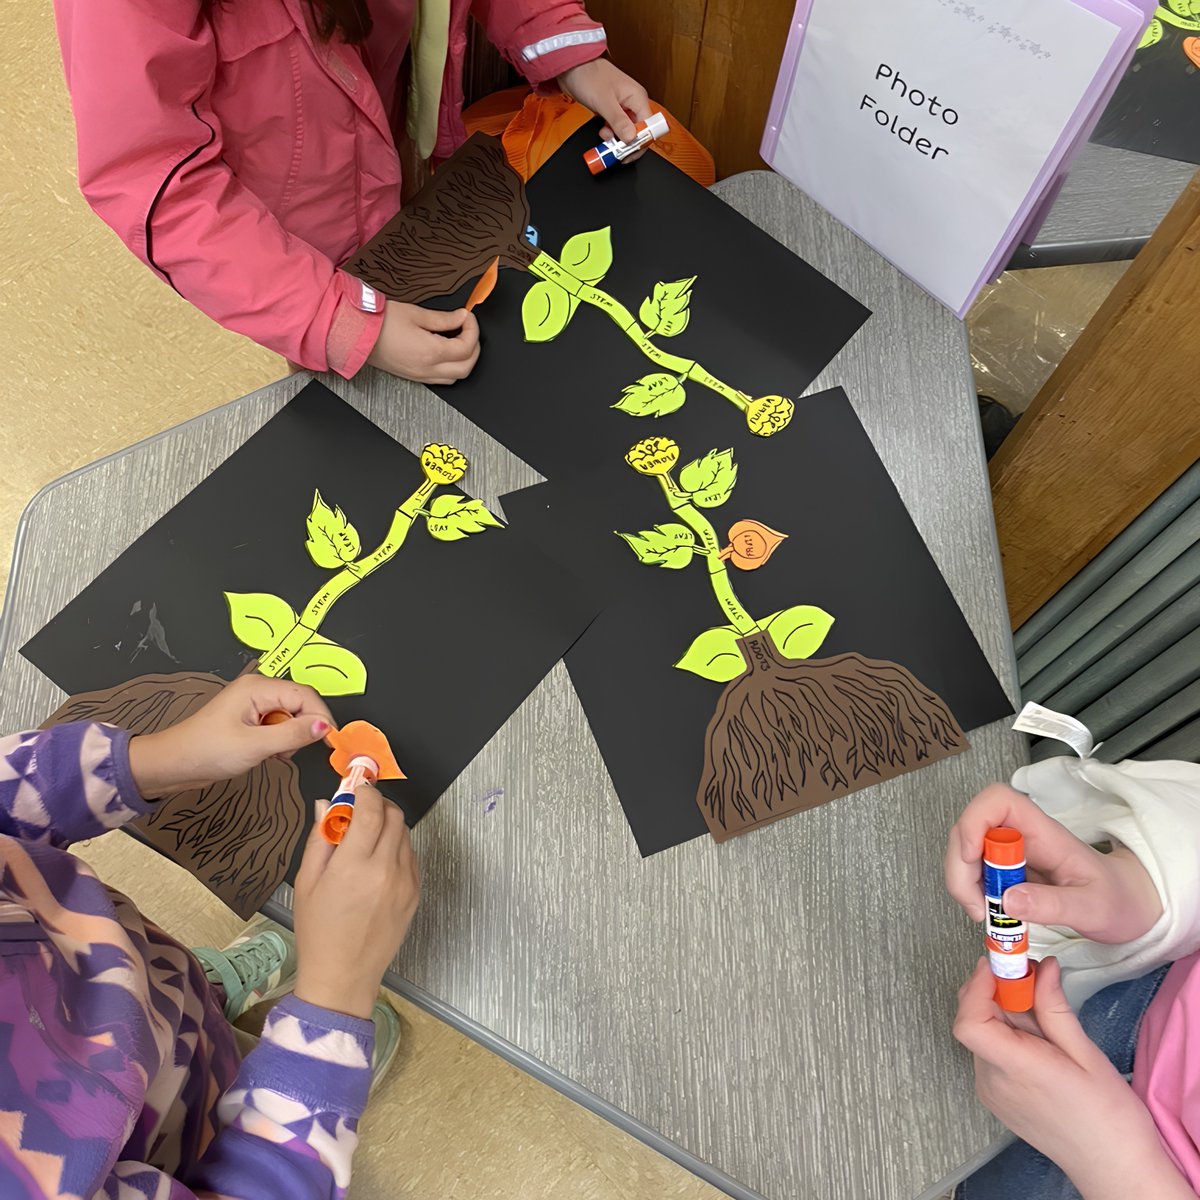 Education and Outreach Coordinator Megan Truesdail, alongside Savanah Dale & Elise Tomaszewski from the Van Eck lab, recently led an exciting program with second-grade classes at Northeast Elementary School, delving into the plant lifecycle using Physalis plants.